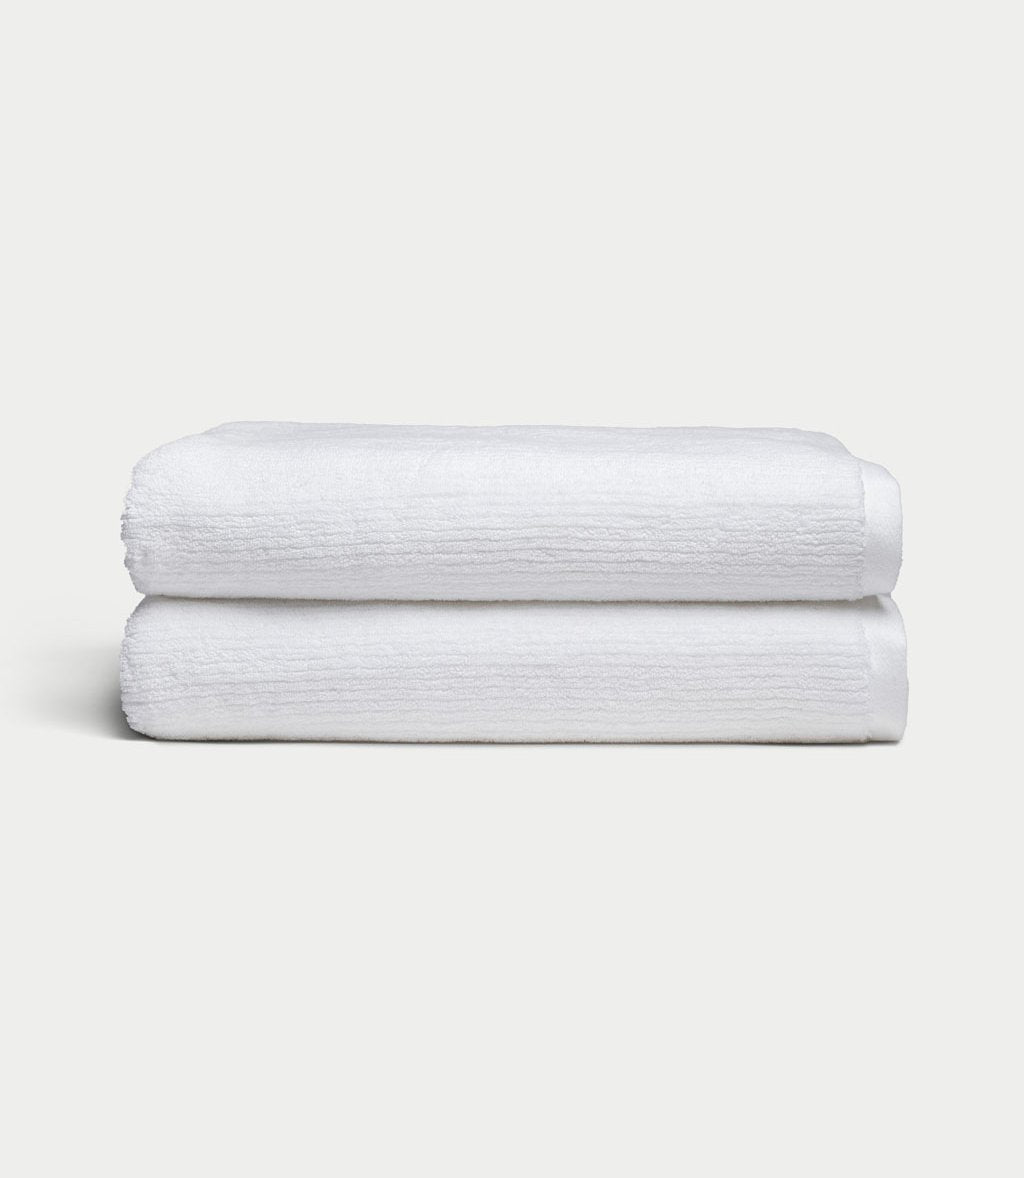 Ribbed Terry Bath Sheets in the color White. Photo of product taken with white background. |Color:White